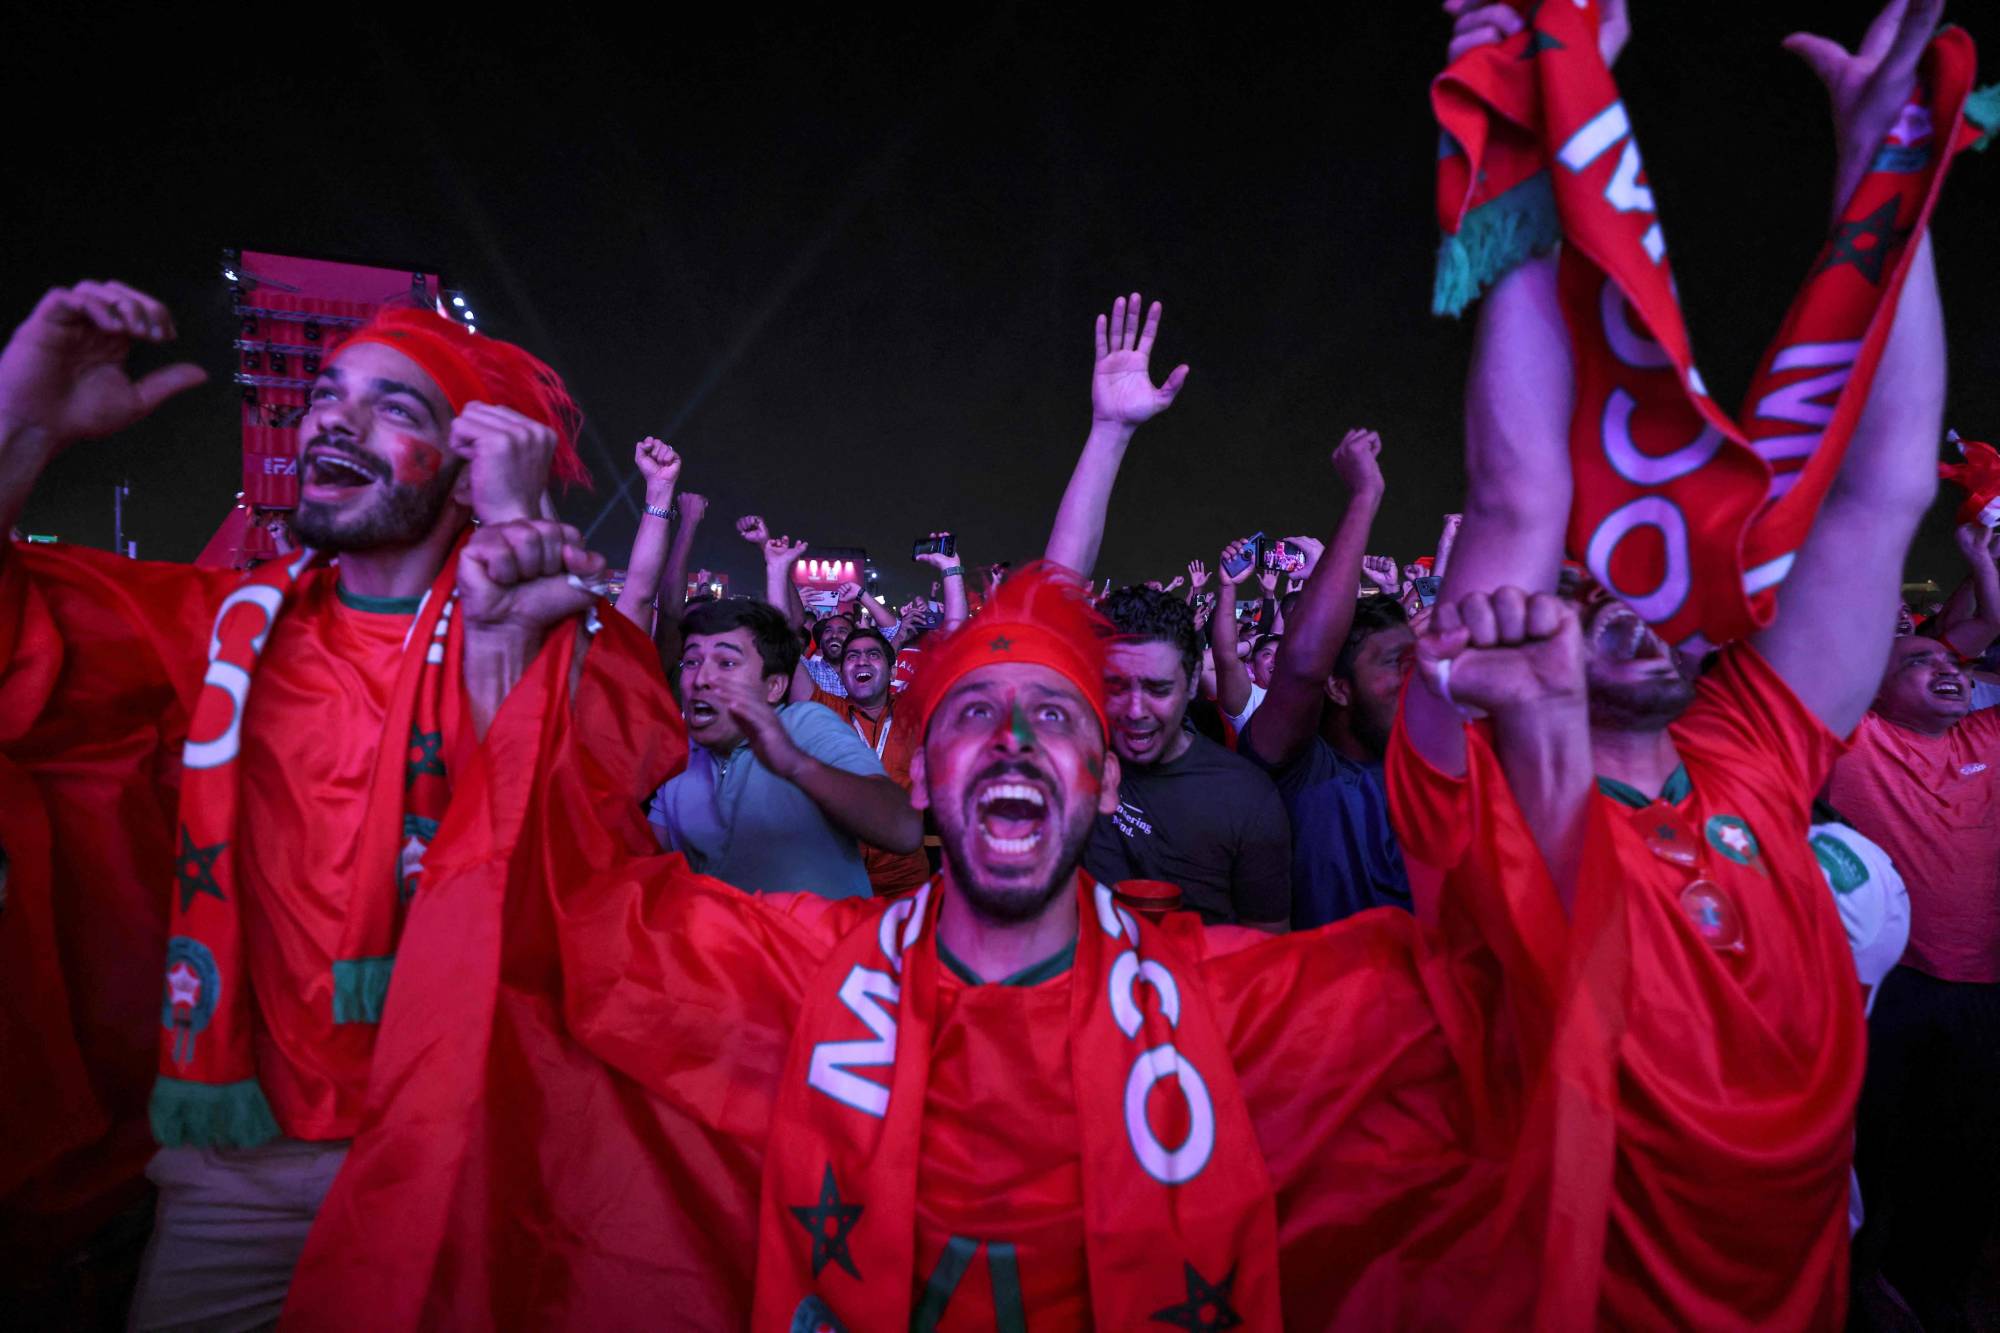 Morocco loses World Cup match, but handsome coach has fans